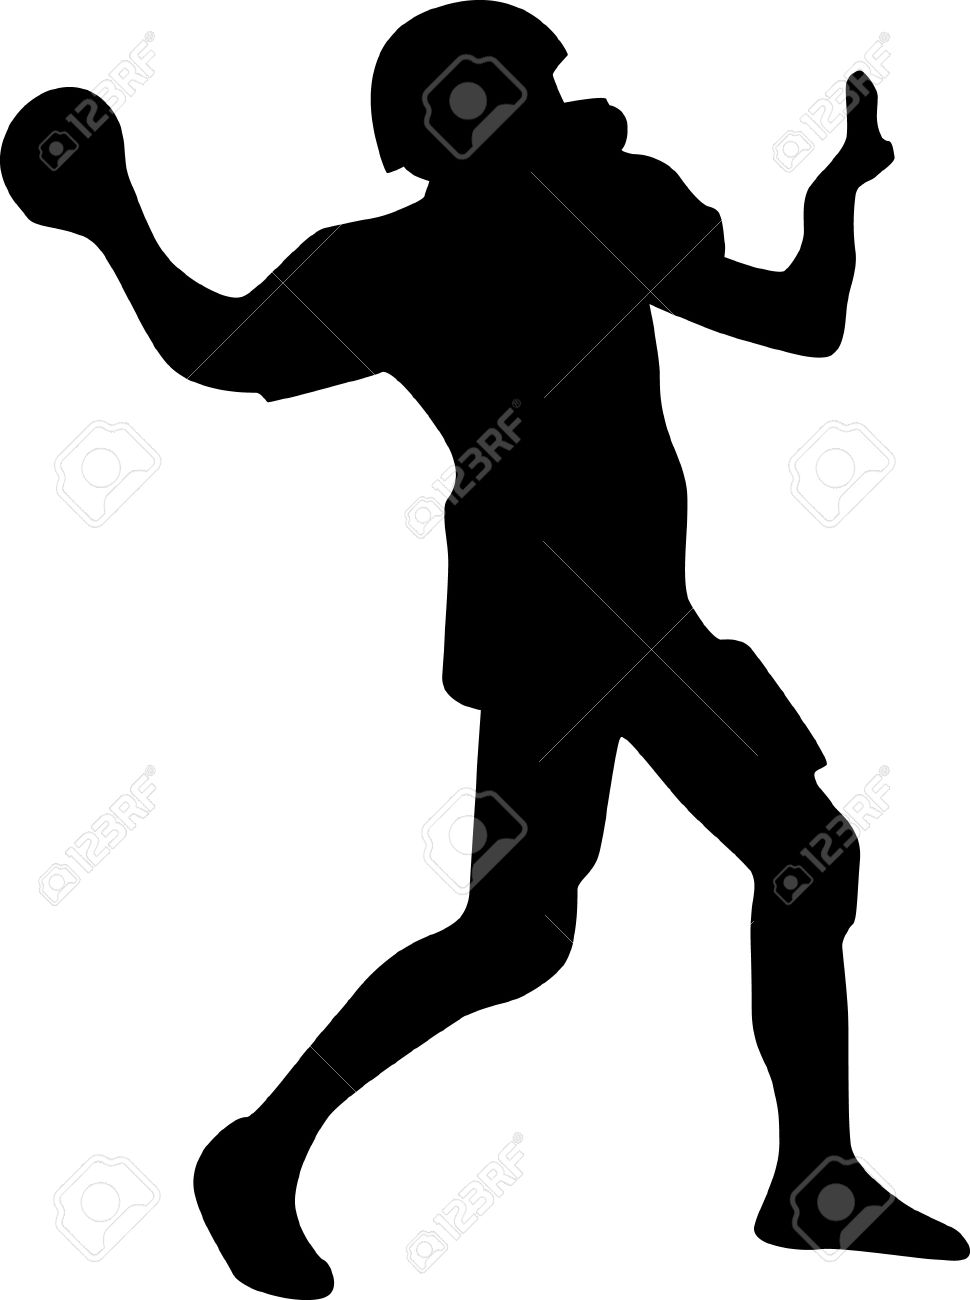 American Football Player Silhouette Royalty Free Cliparts, Vectors.